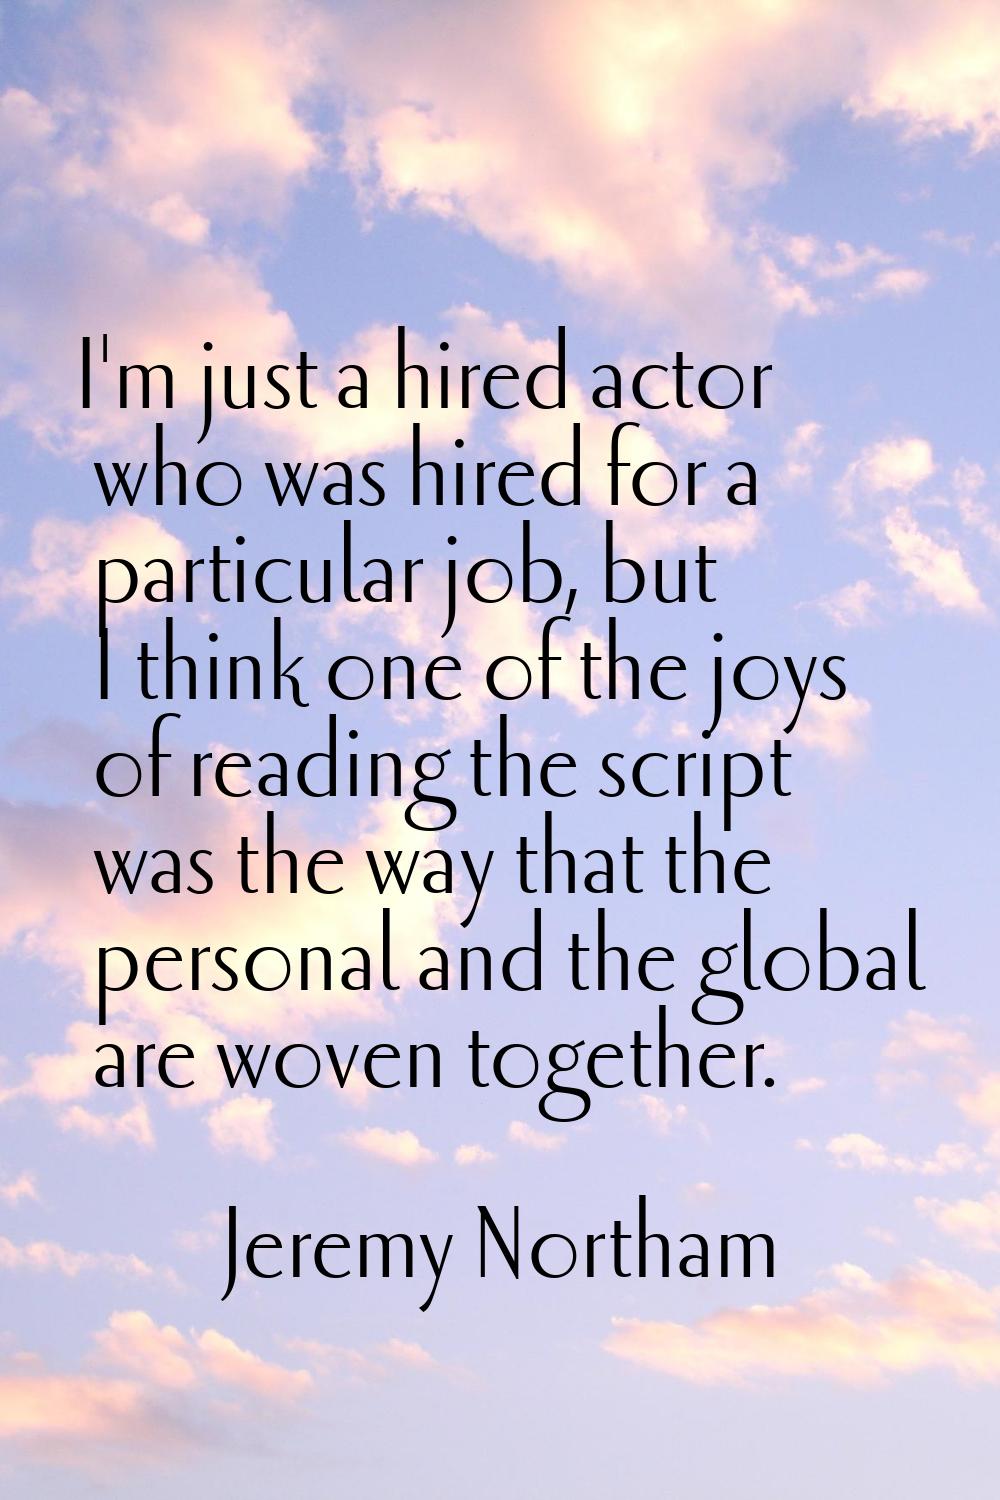 I'm just a hired actor who was hired for a particular job, but I think one of the joys of reading t